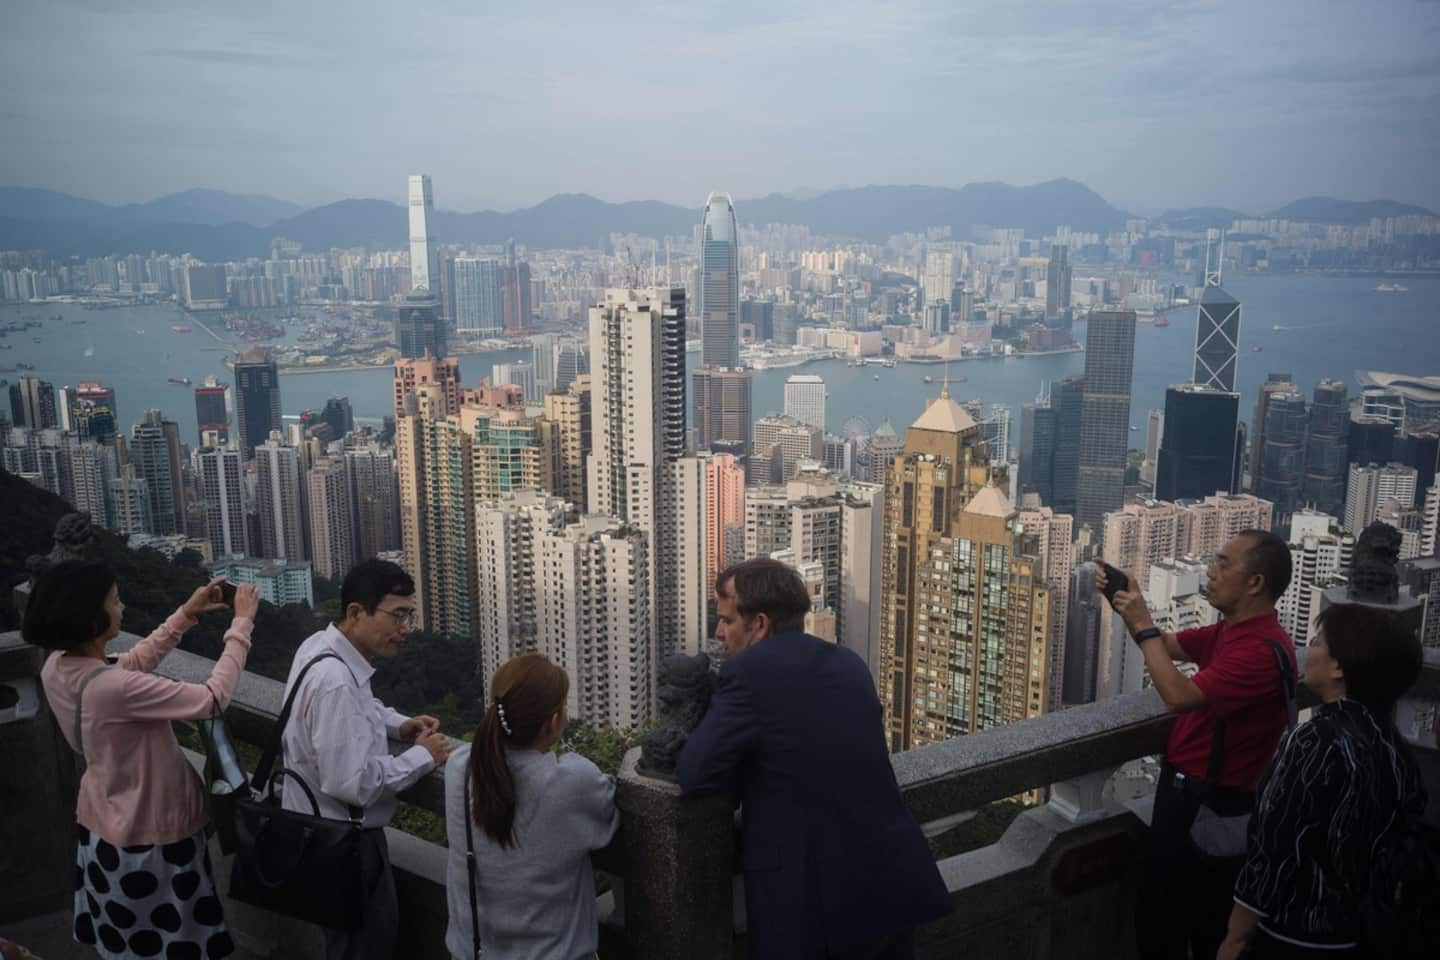 "The more the merrier...": Asia prepares for the expected return of Chinese tourists